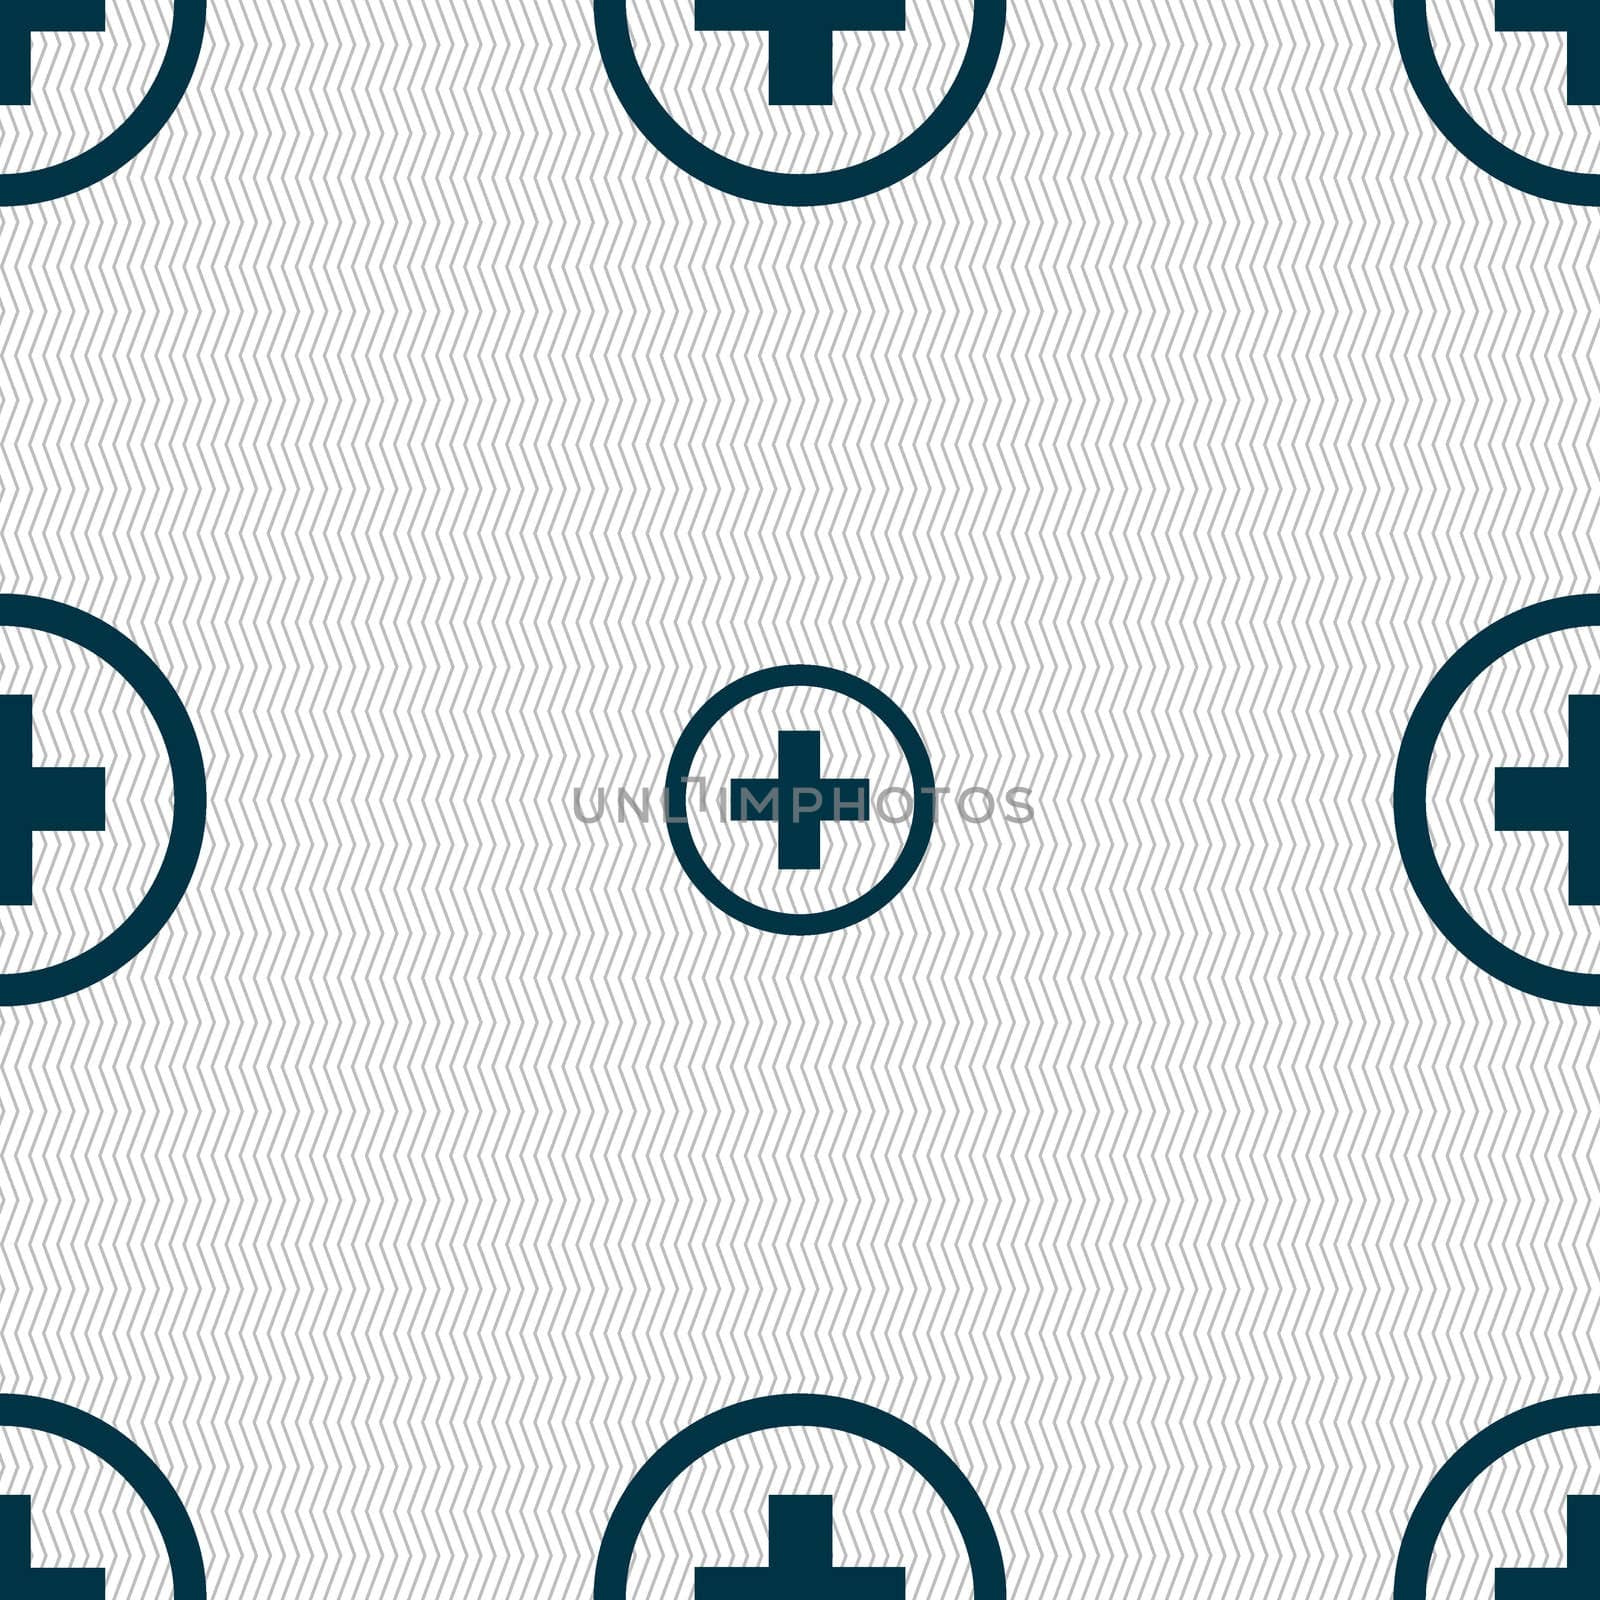 Plus, Positive, zoom icon sign. Seamless abstract background with geometric shapes. illustration